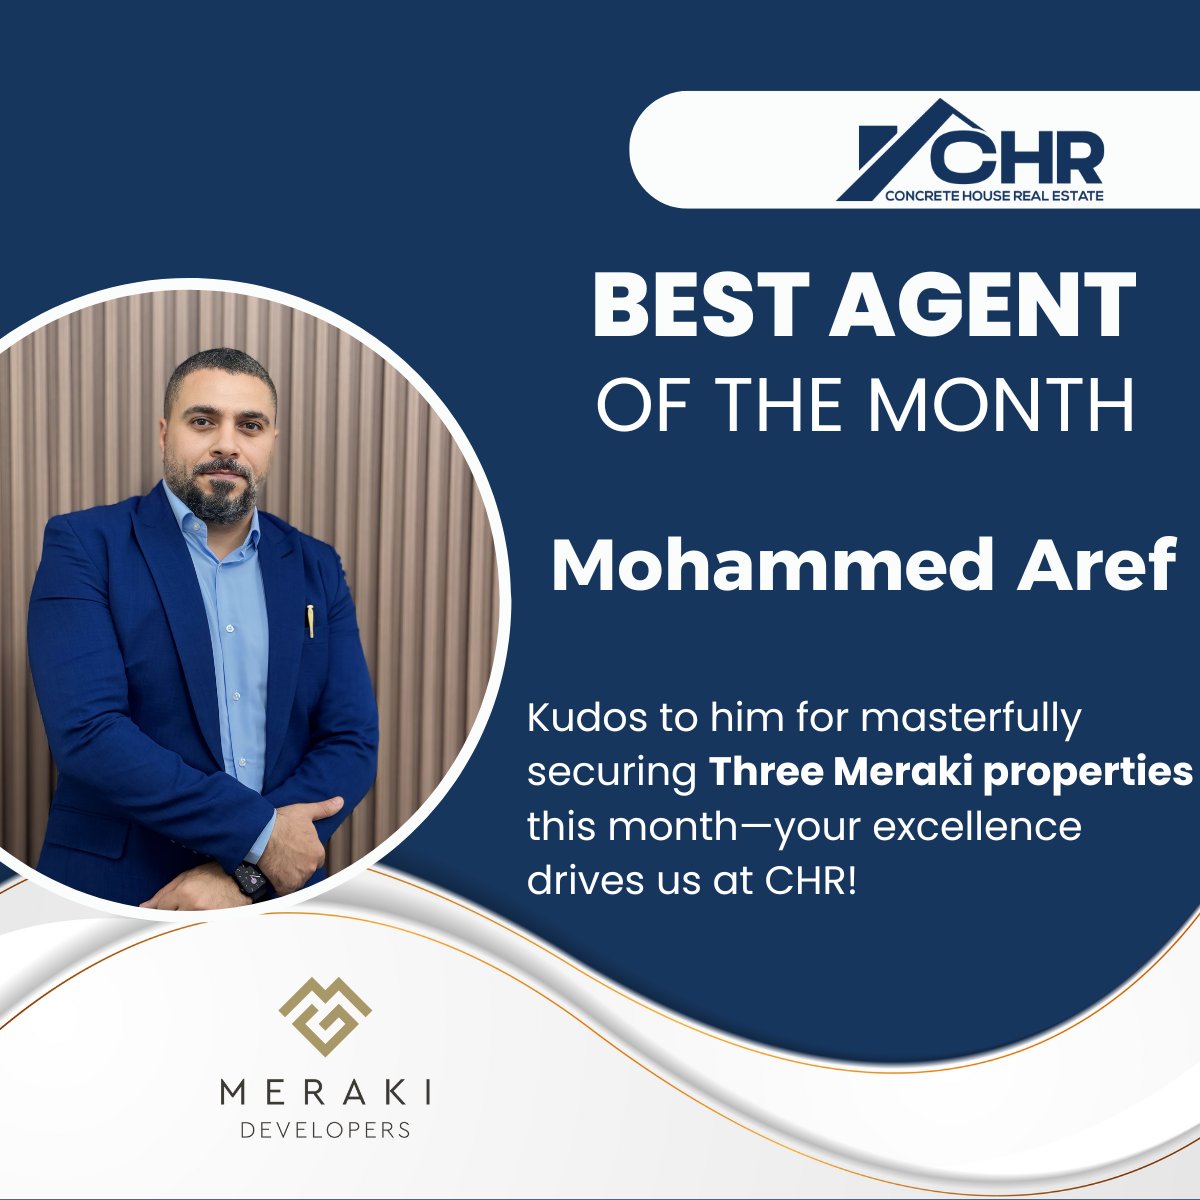 🌟 Agent of the Month: Mohammed Aref 🌟

#EmployeeRecognition #TopPerformer #RealEstateExcellence